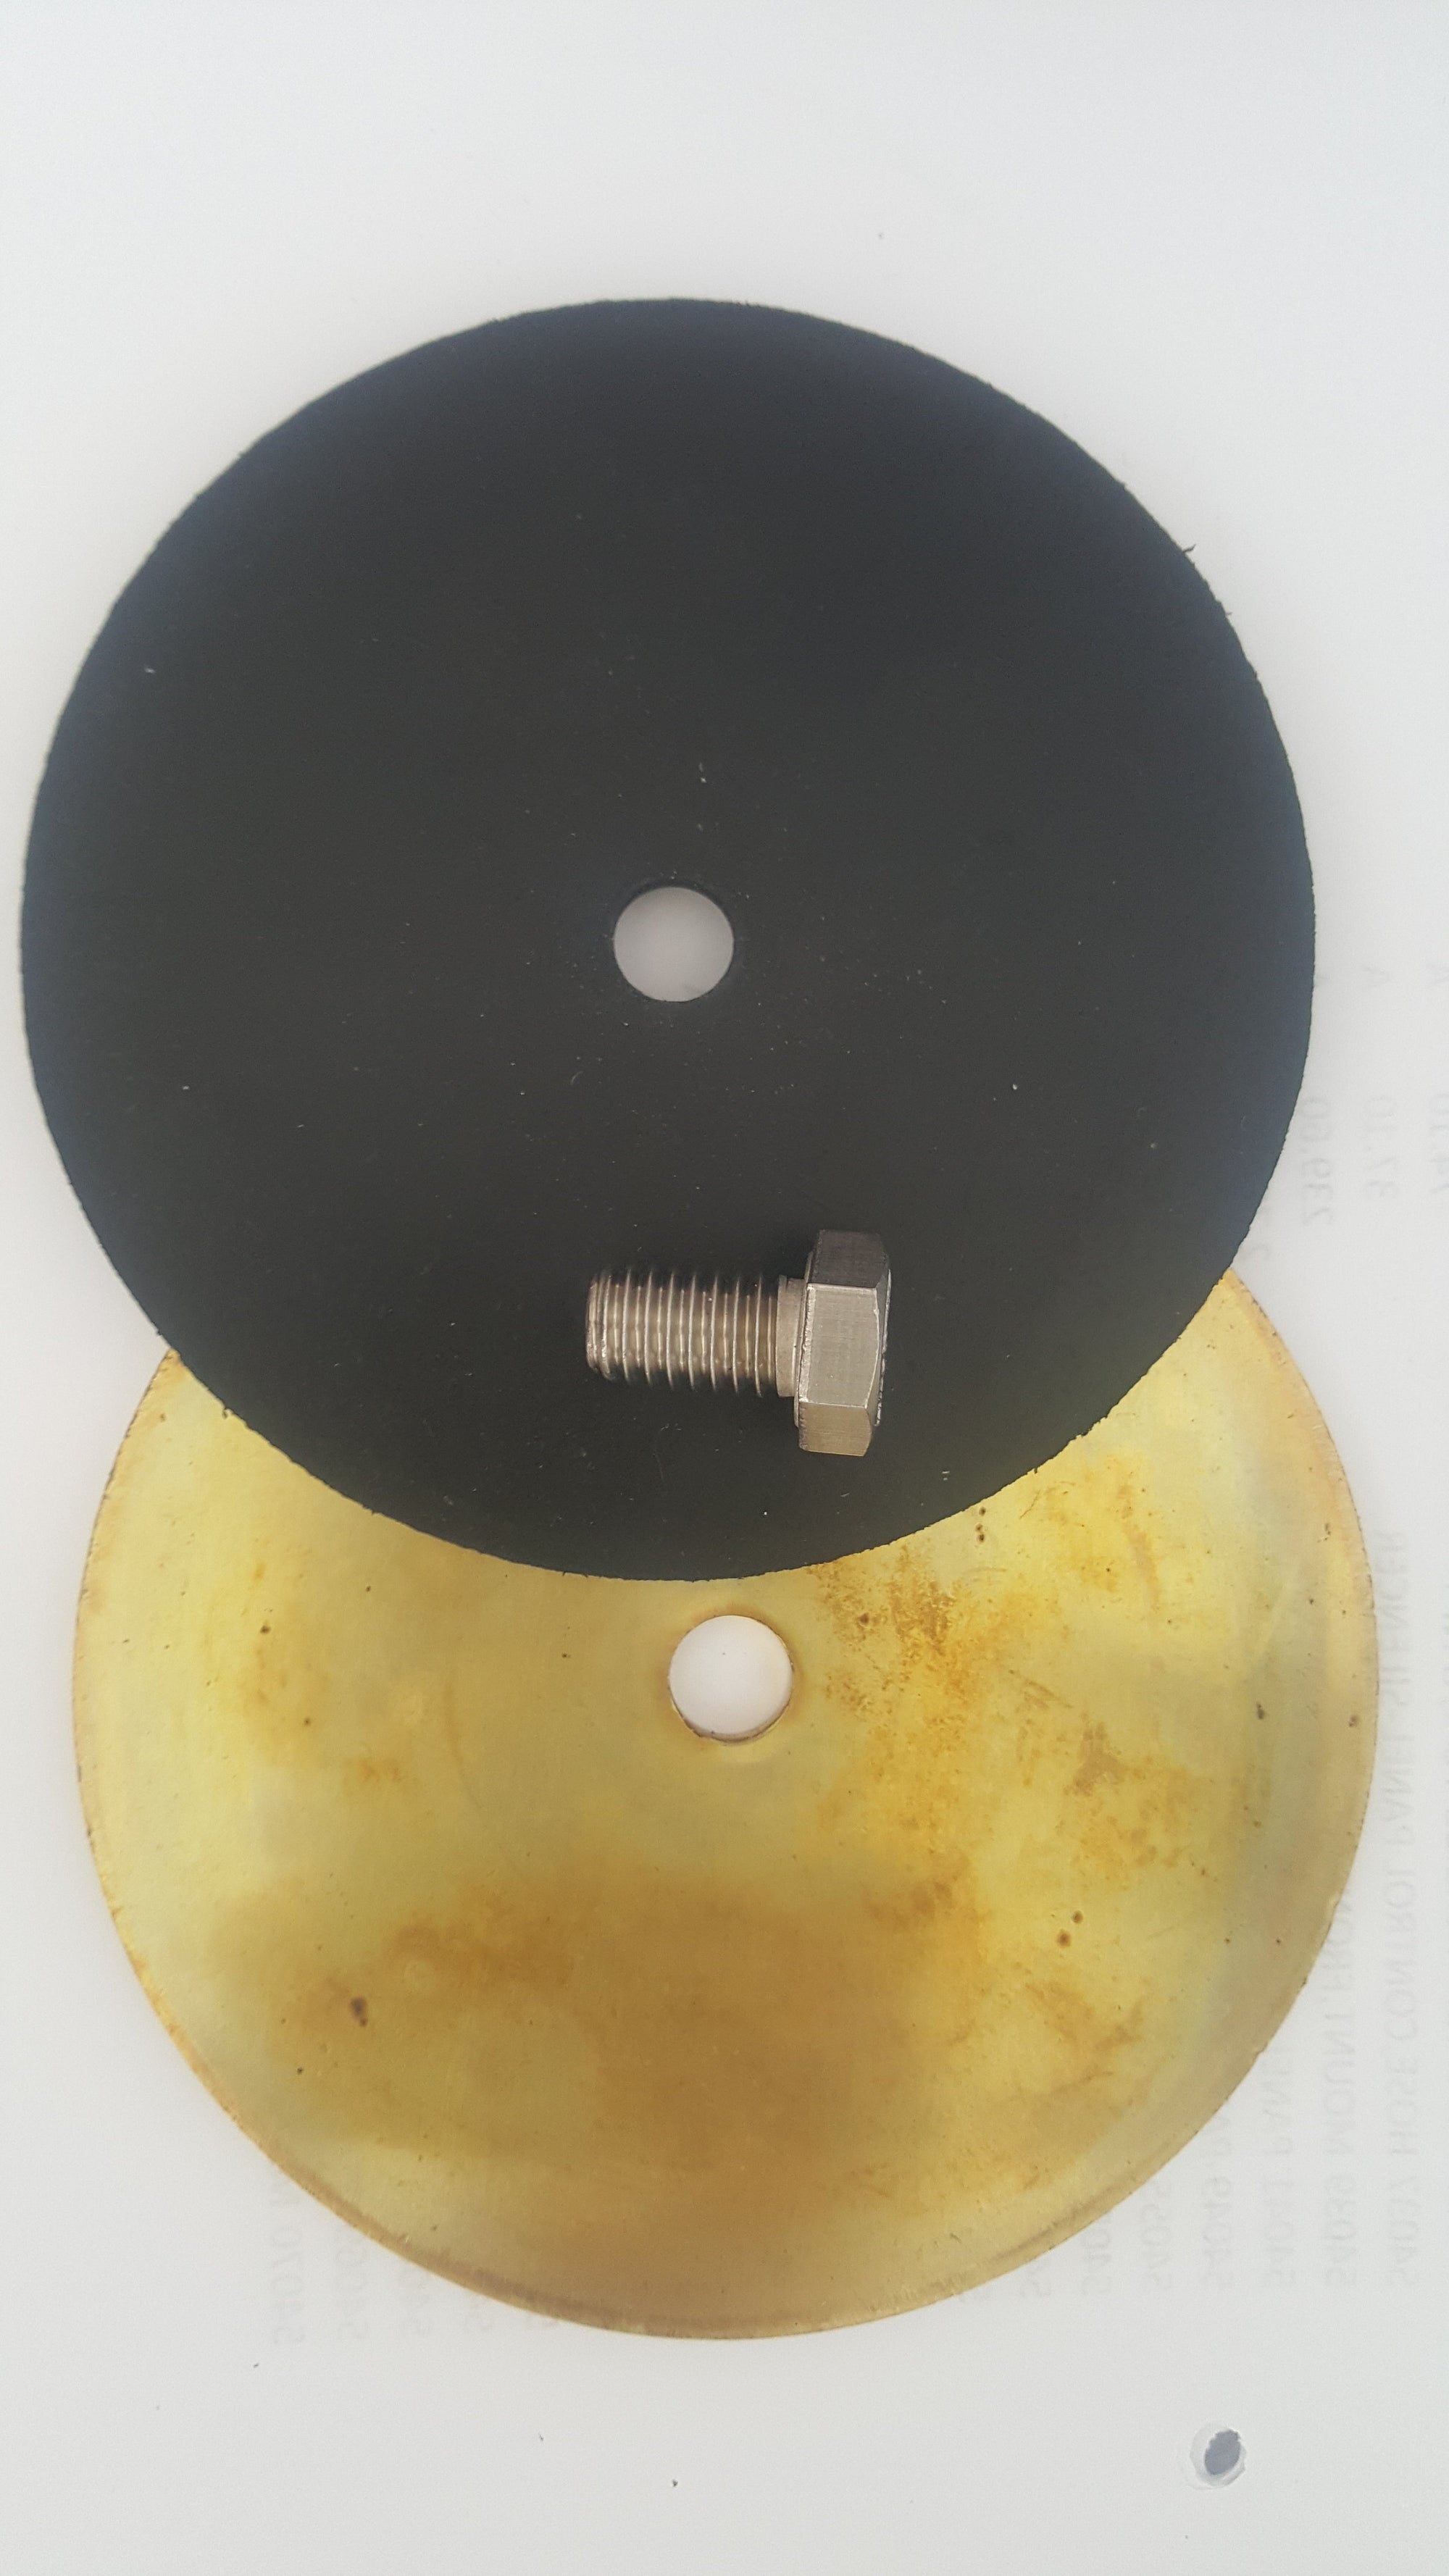 2.5" End Cover Gasket Kit for Heat Exchanger